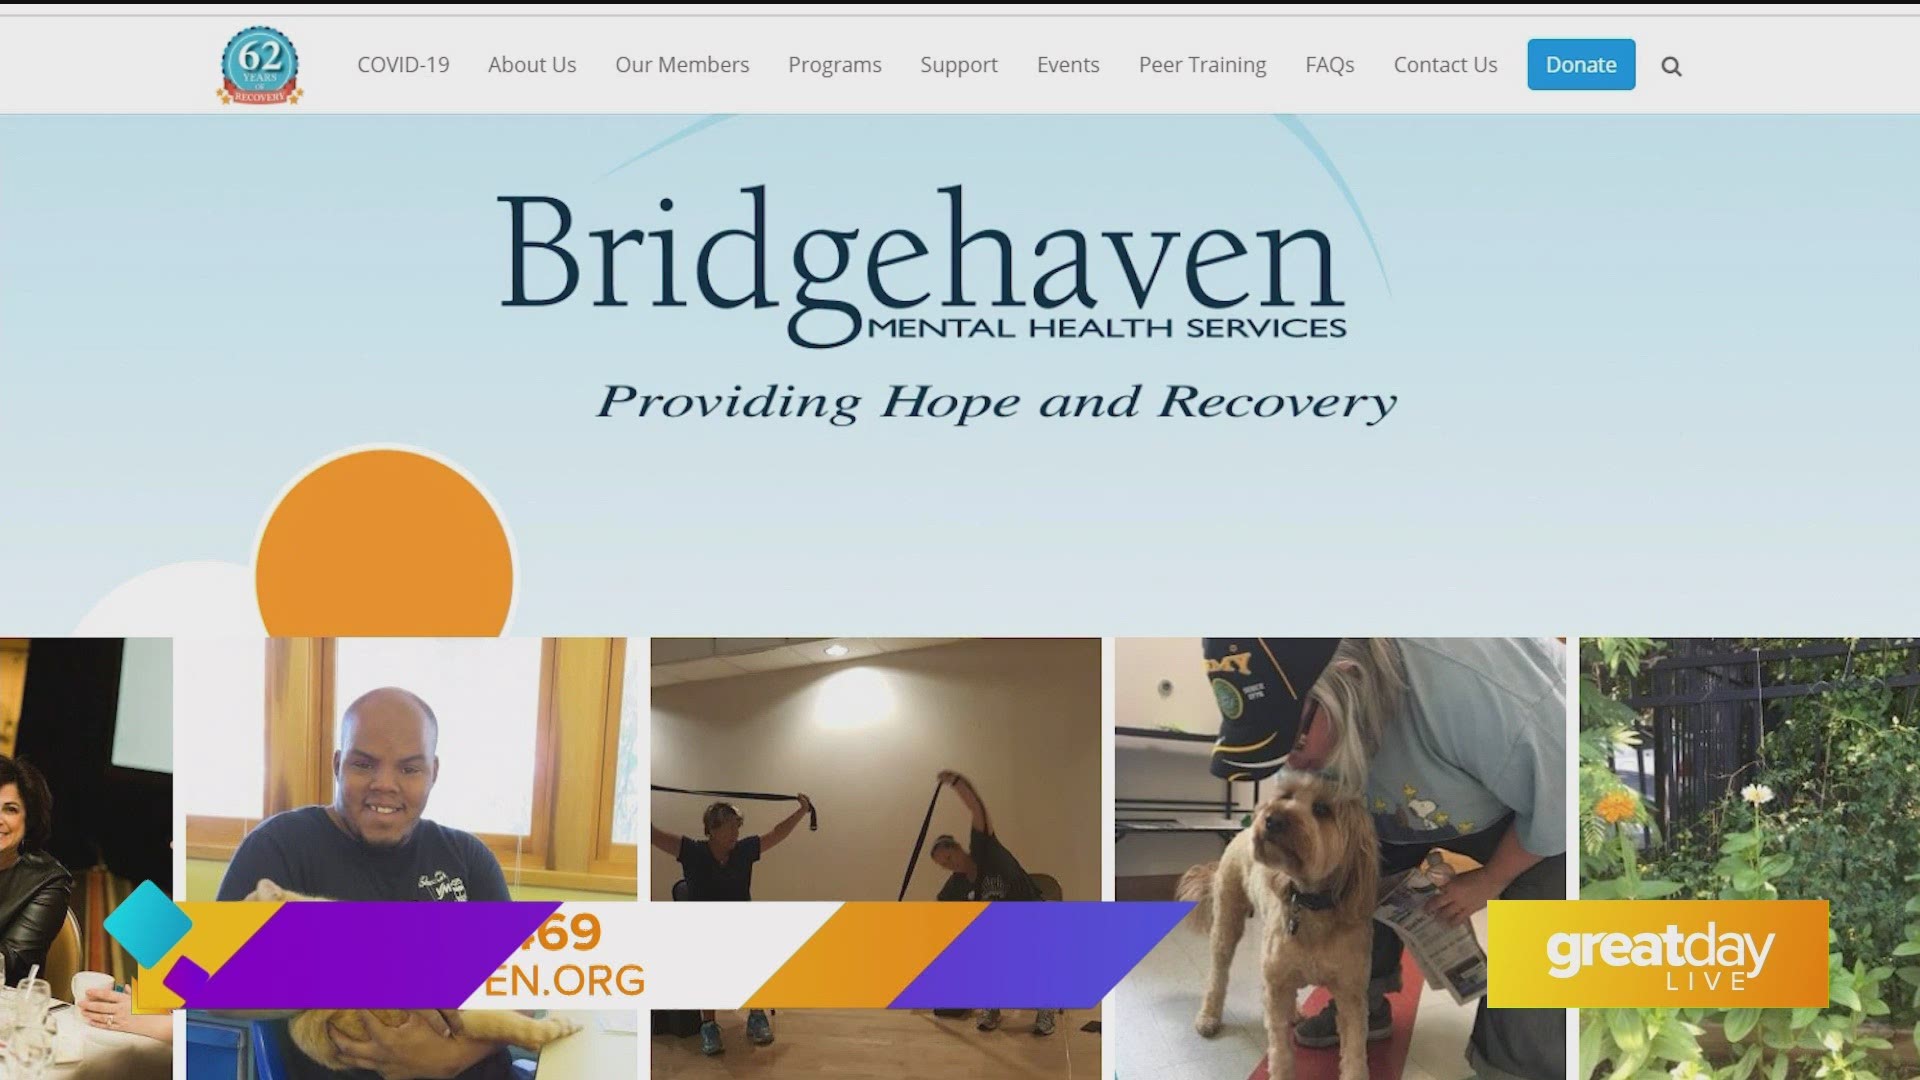 For more information, go to bridgehaven.org.